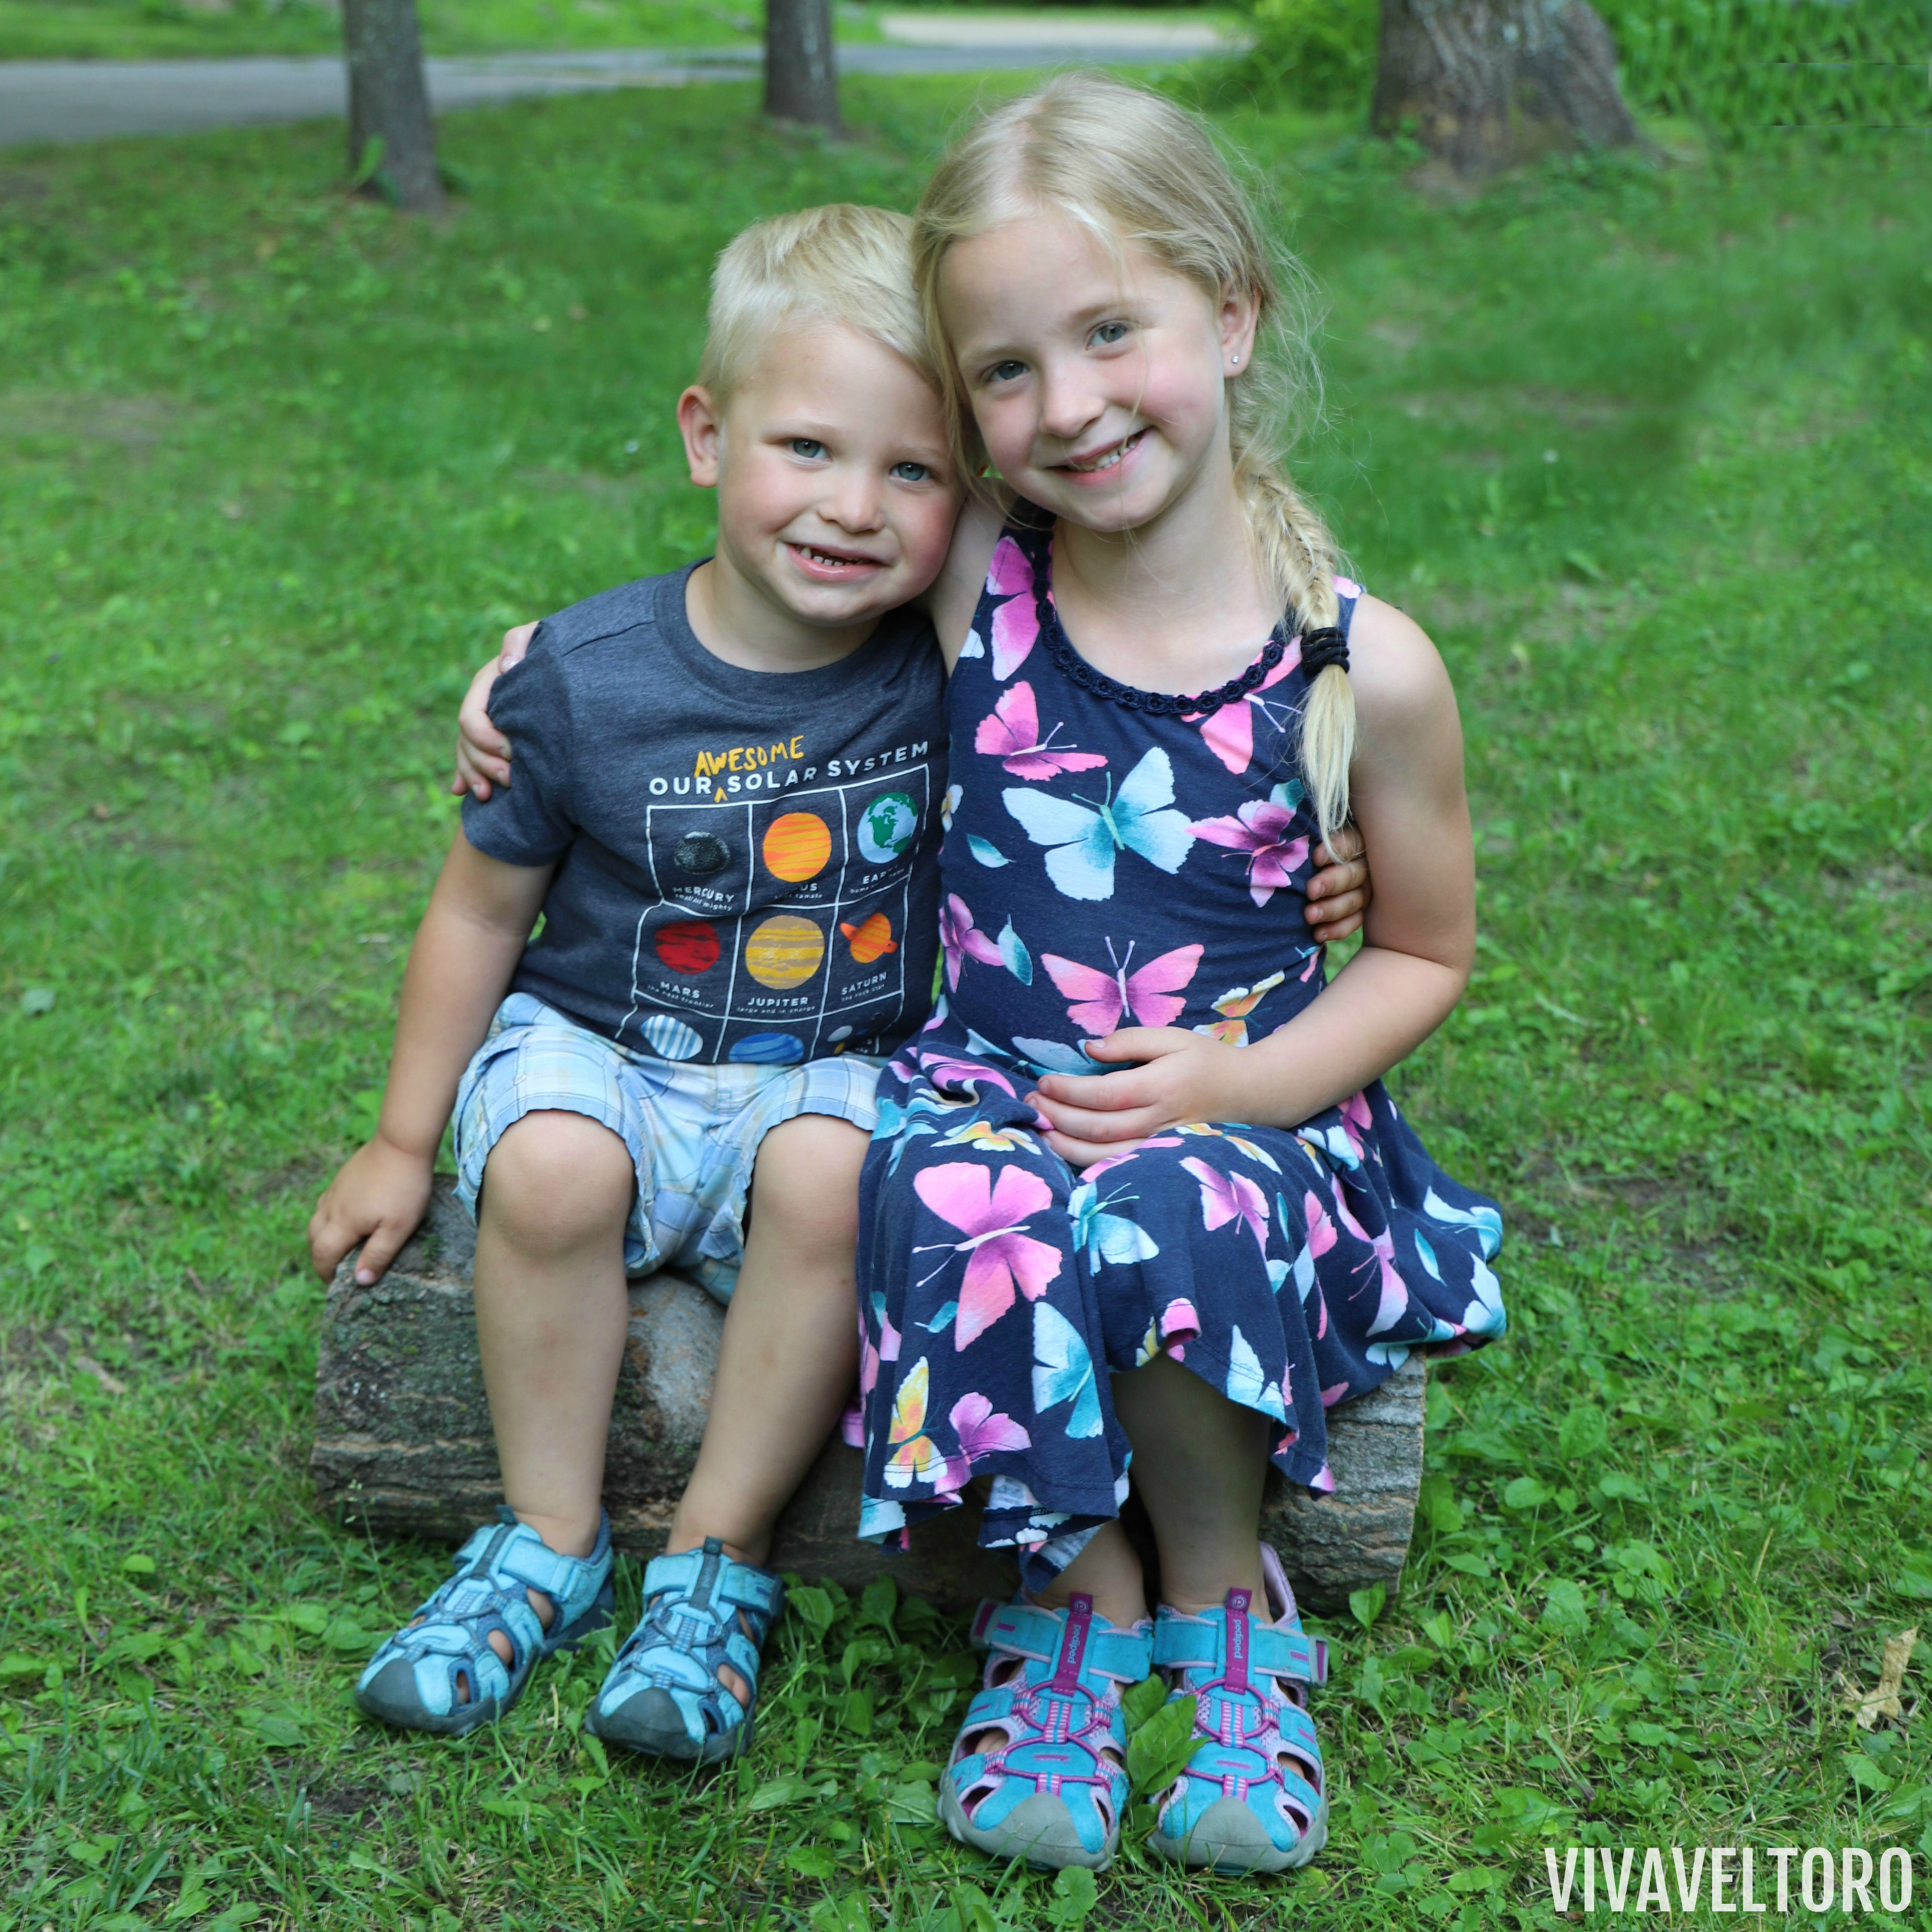 The Best Hiking Sandals for Kids [Plus 